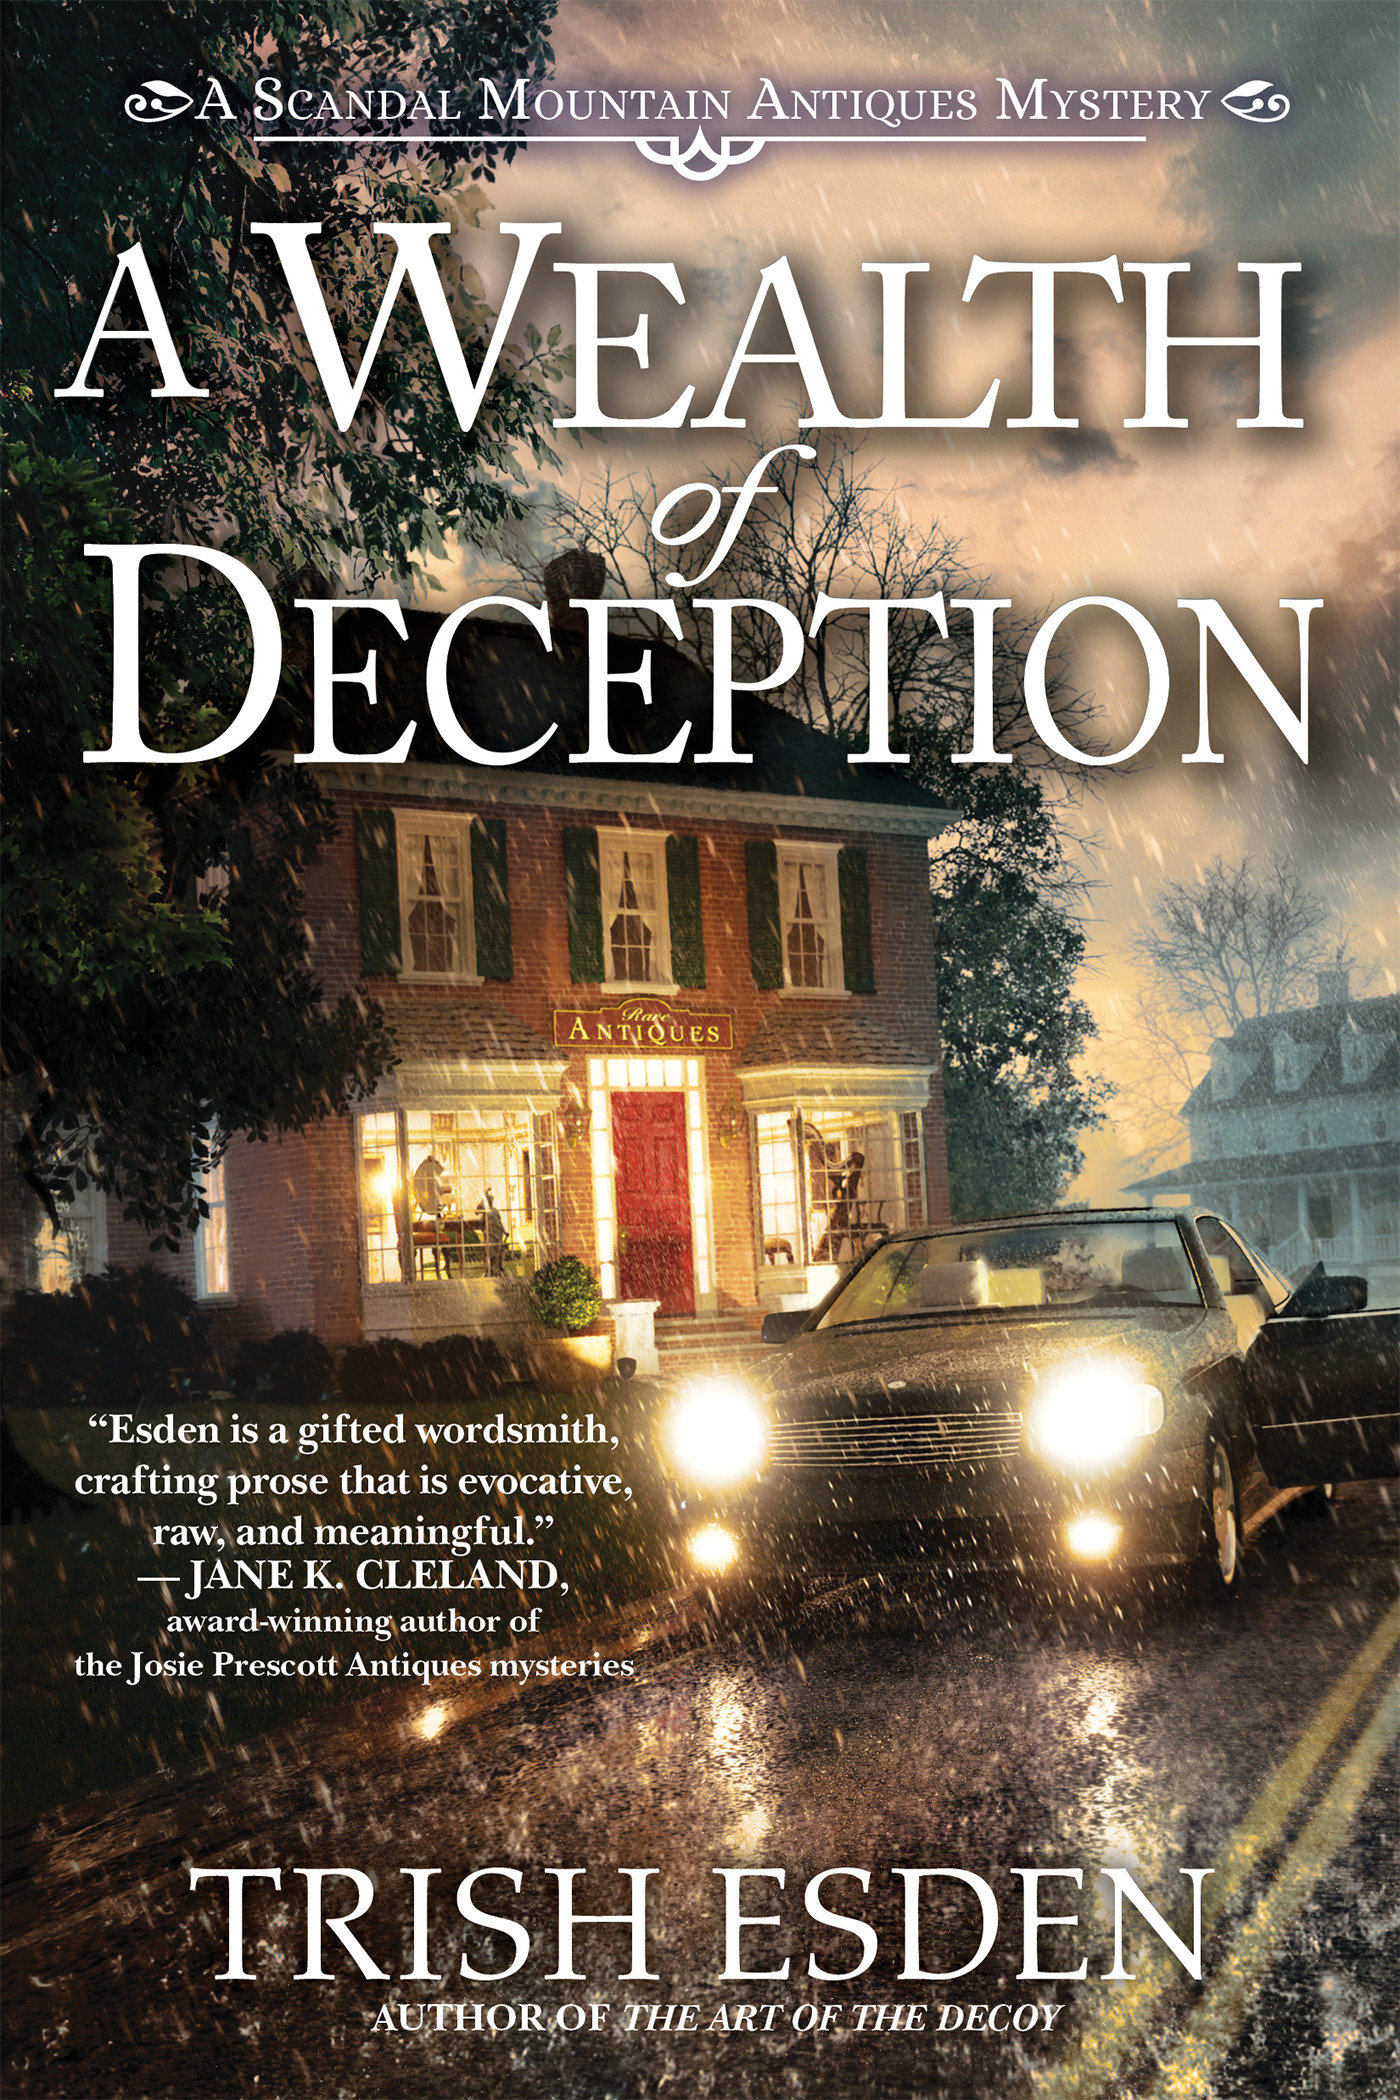 A Wealth Of Deception (Hardcover Book)